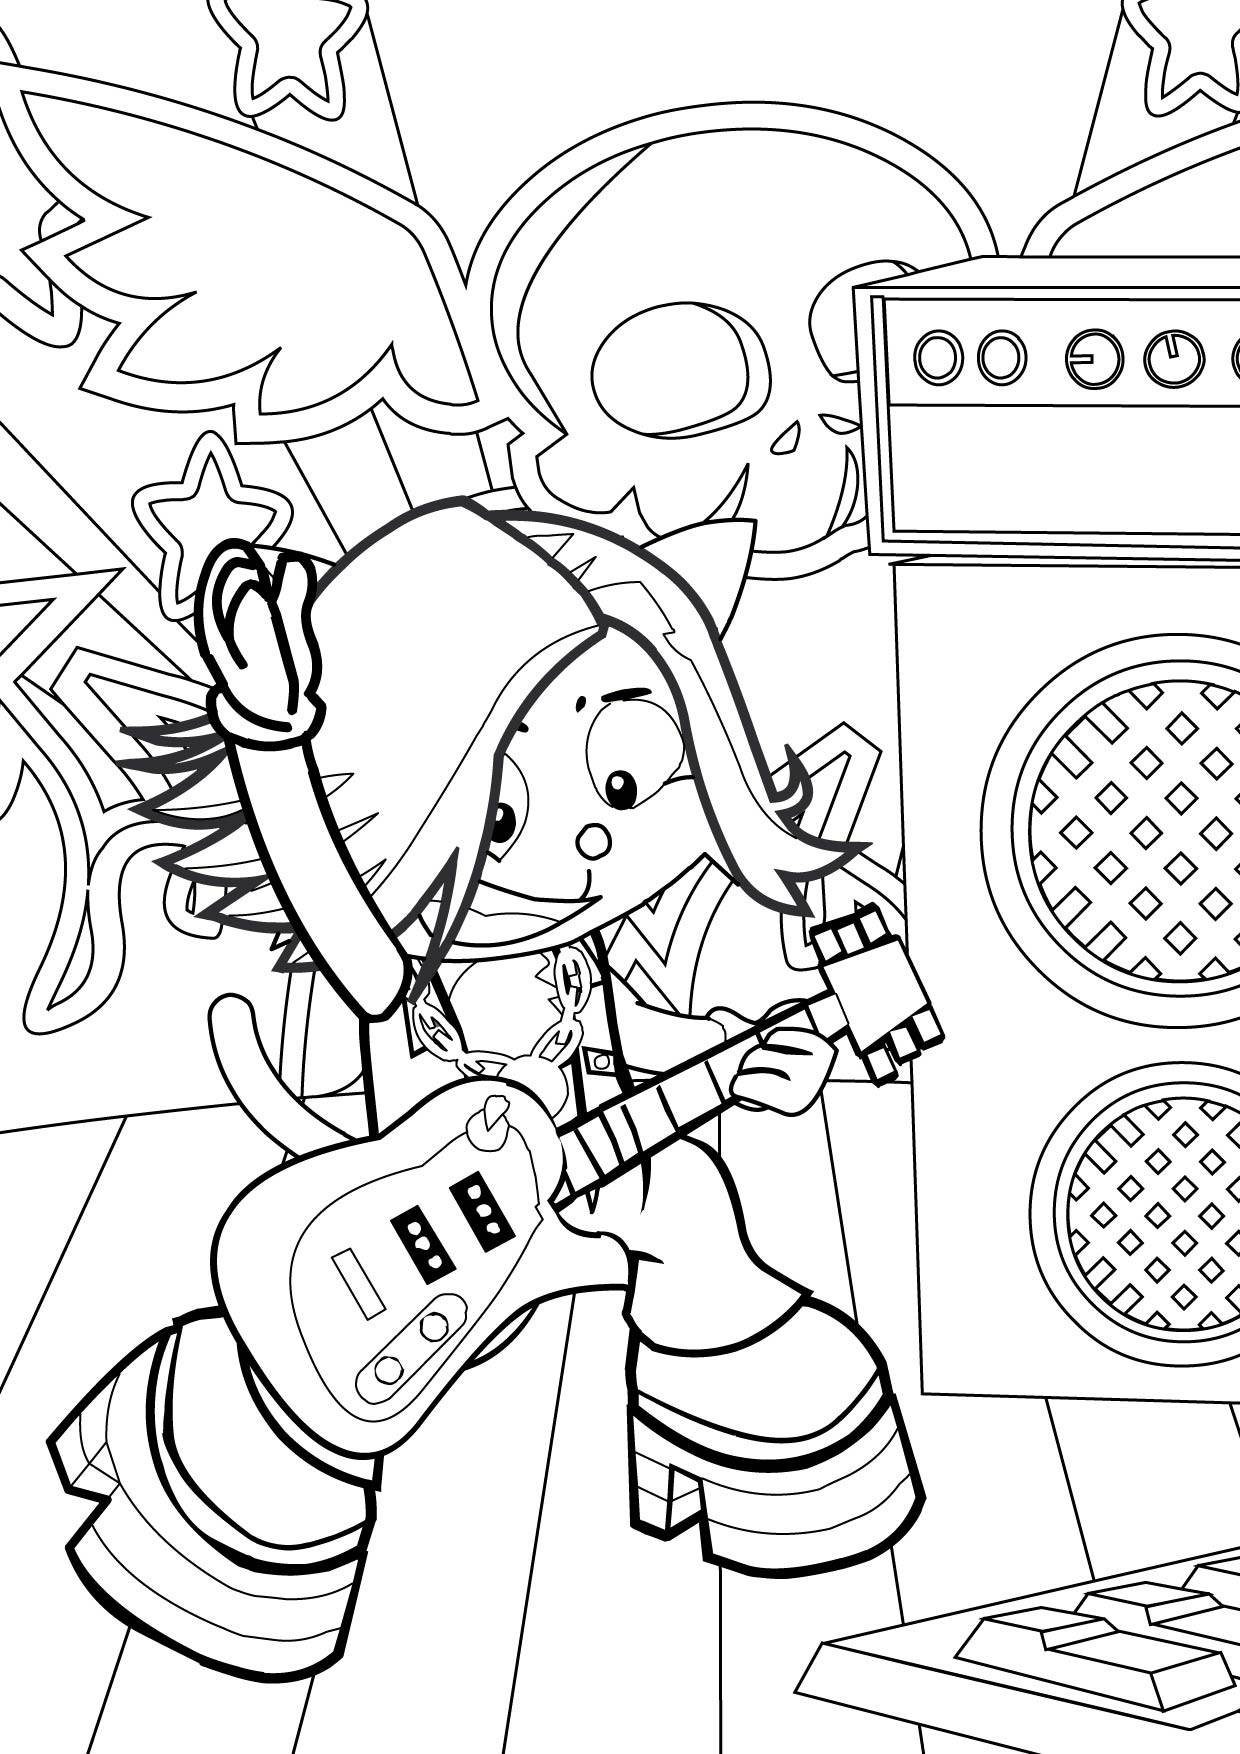 Quickly Rockstar Coloring Pages Printables Rock Star Page Handipoints